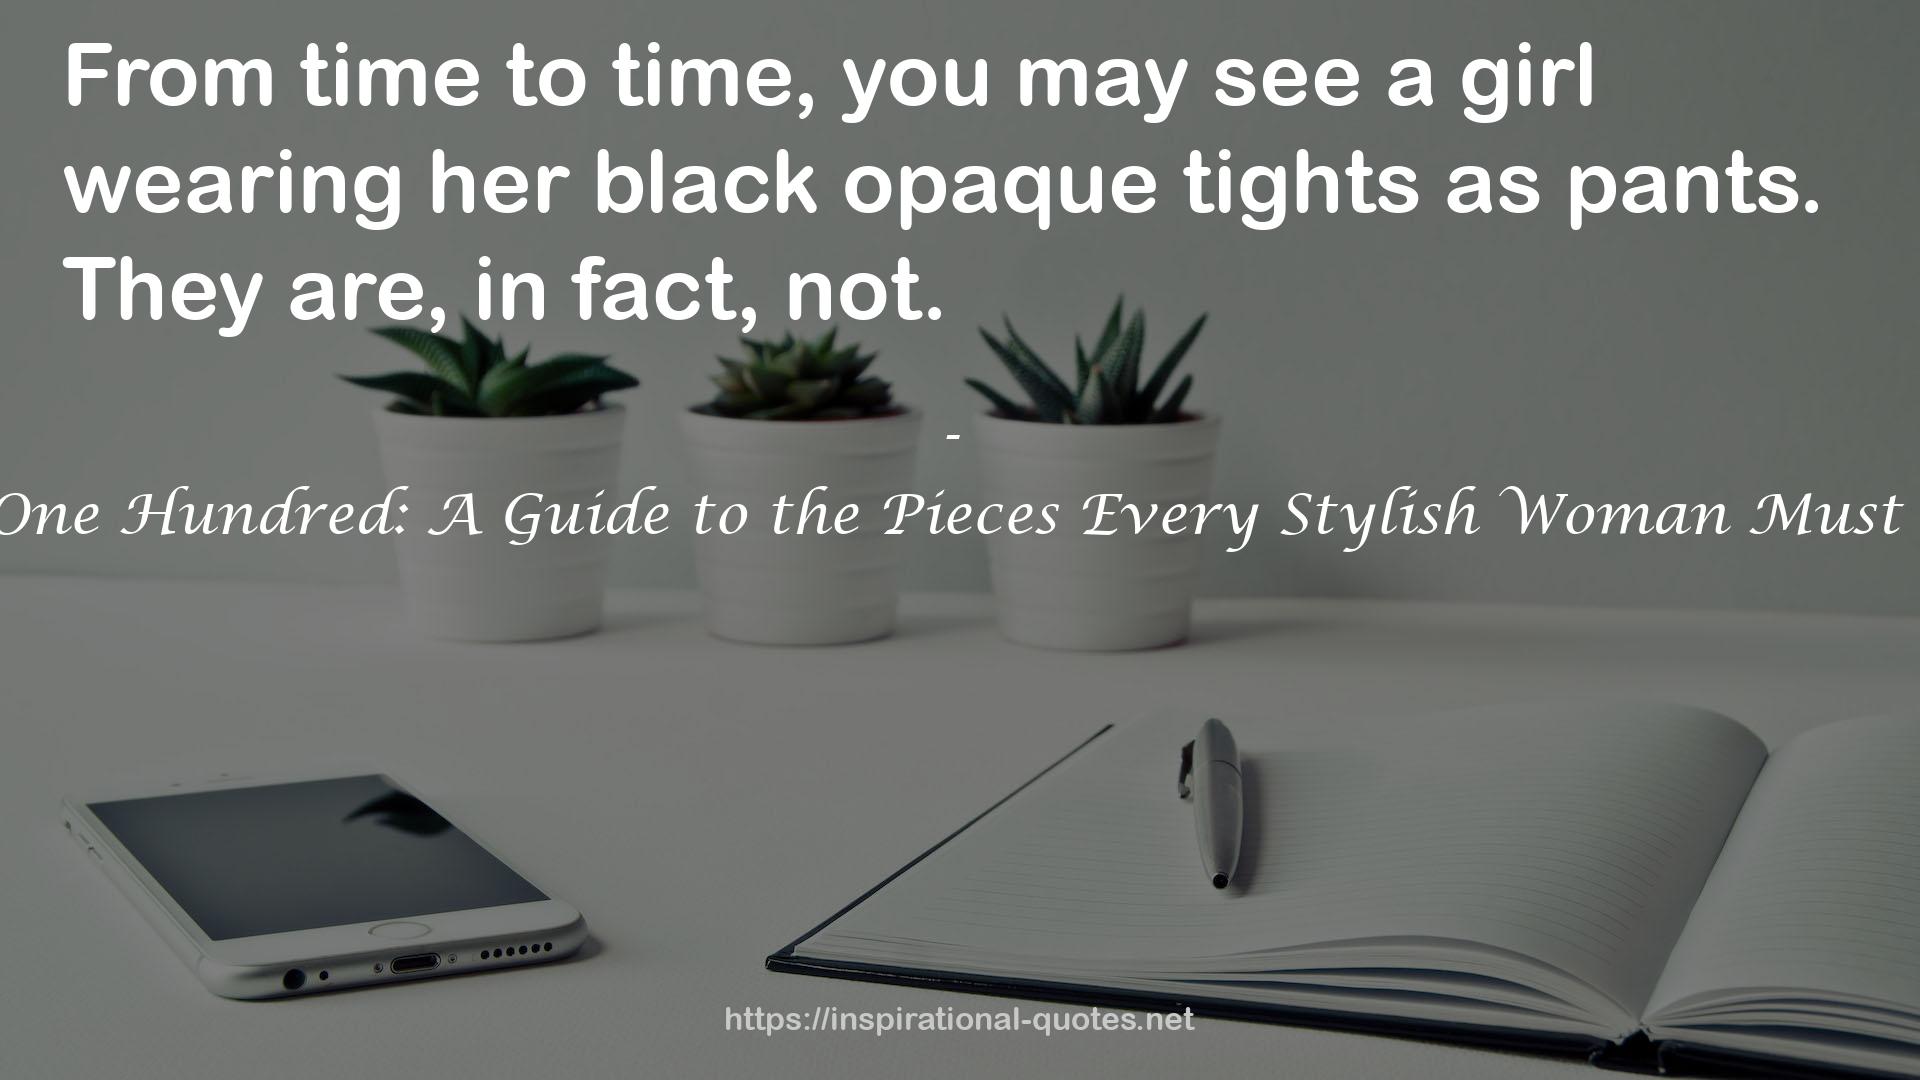 The One Hundred: A Guide to the Pieces Every Stylish Woman Must Own QUOTES